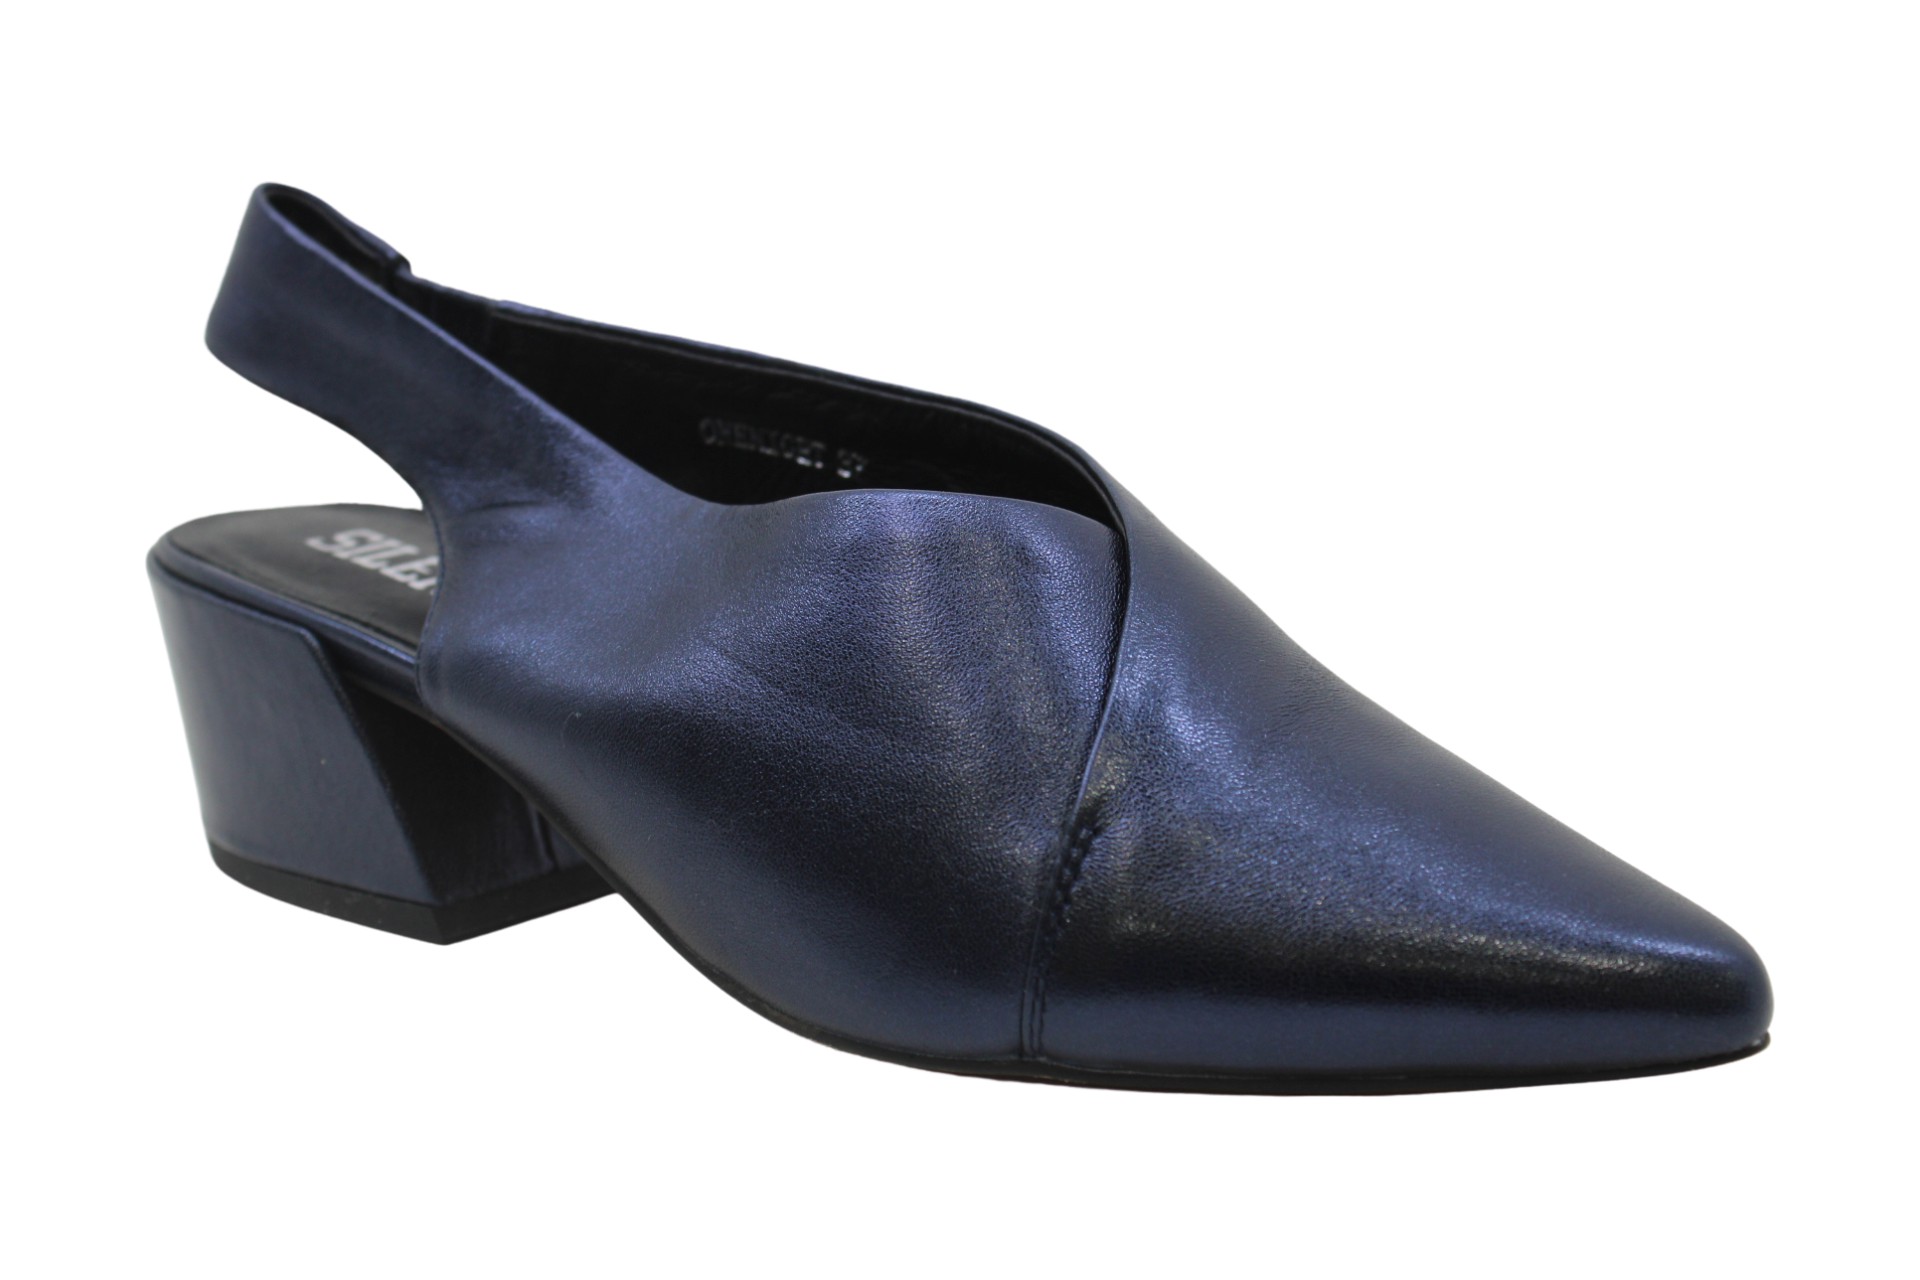 Silent D Women's Shoes One Night Leather Pointed Toe, Navy/metallic ...